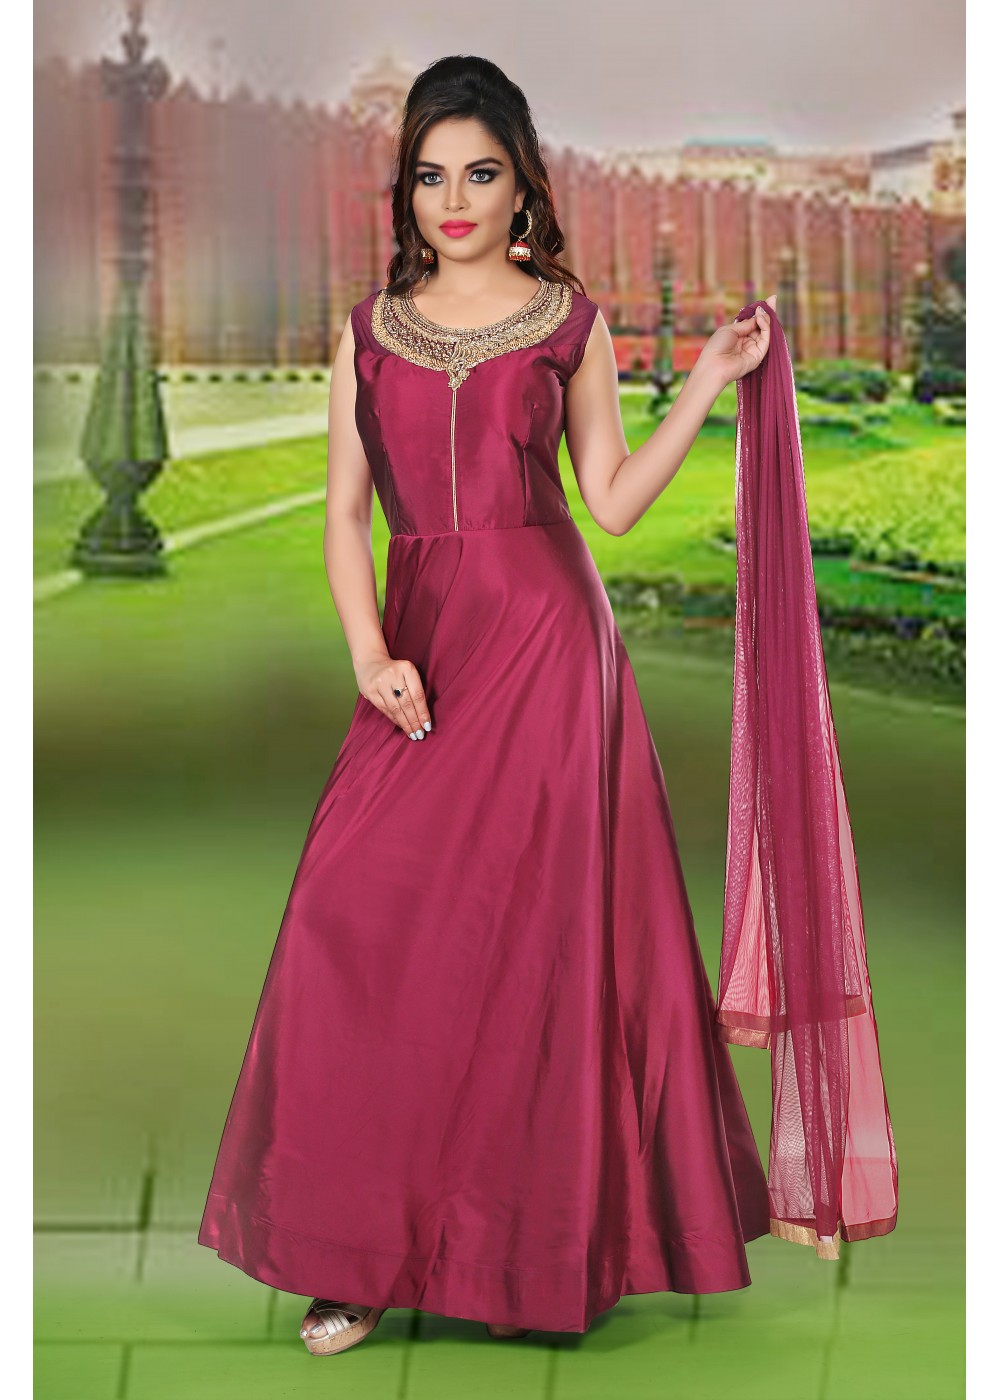 17321 NEW EXCLUSIVE RAKHI SPECIAL LONG MAROON COLOUR GOWN WITH DUPATTA -  Reewaz International | Wholesaler & Exporter of indian ethnic wear catalogs.